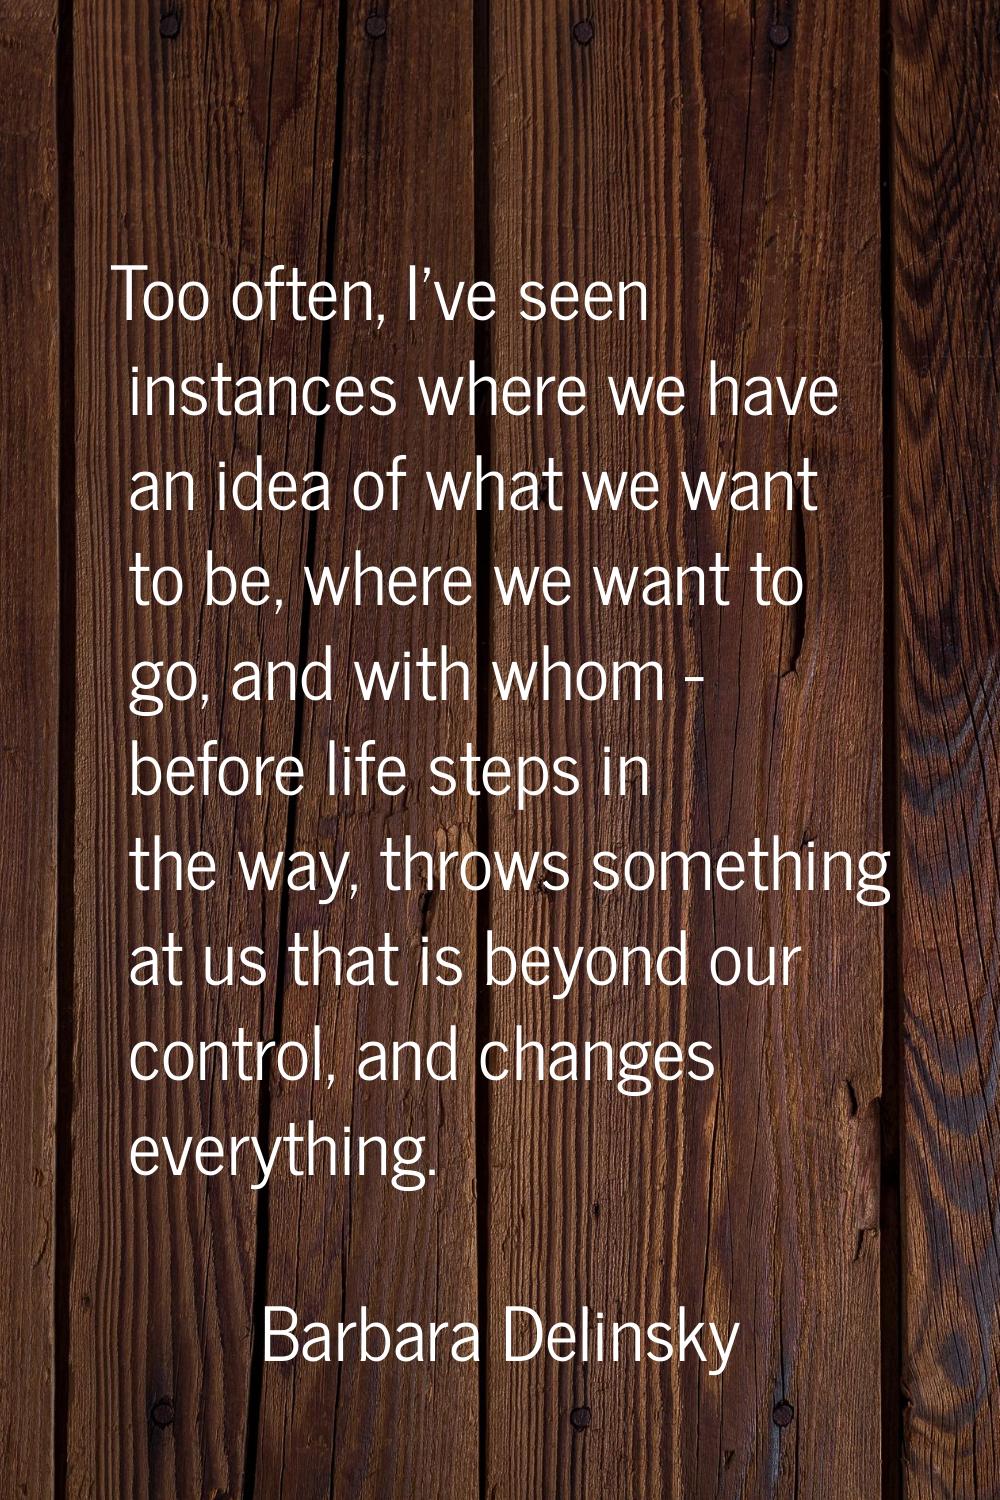 Too often, I've seen instances where we have an idea of what we want to be, where we want to go, an